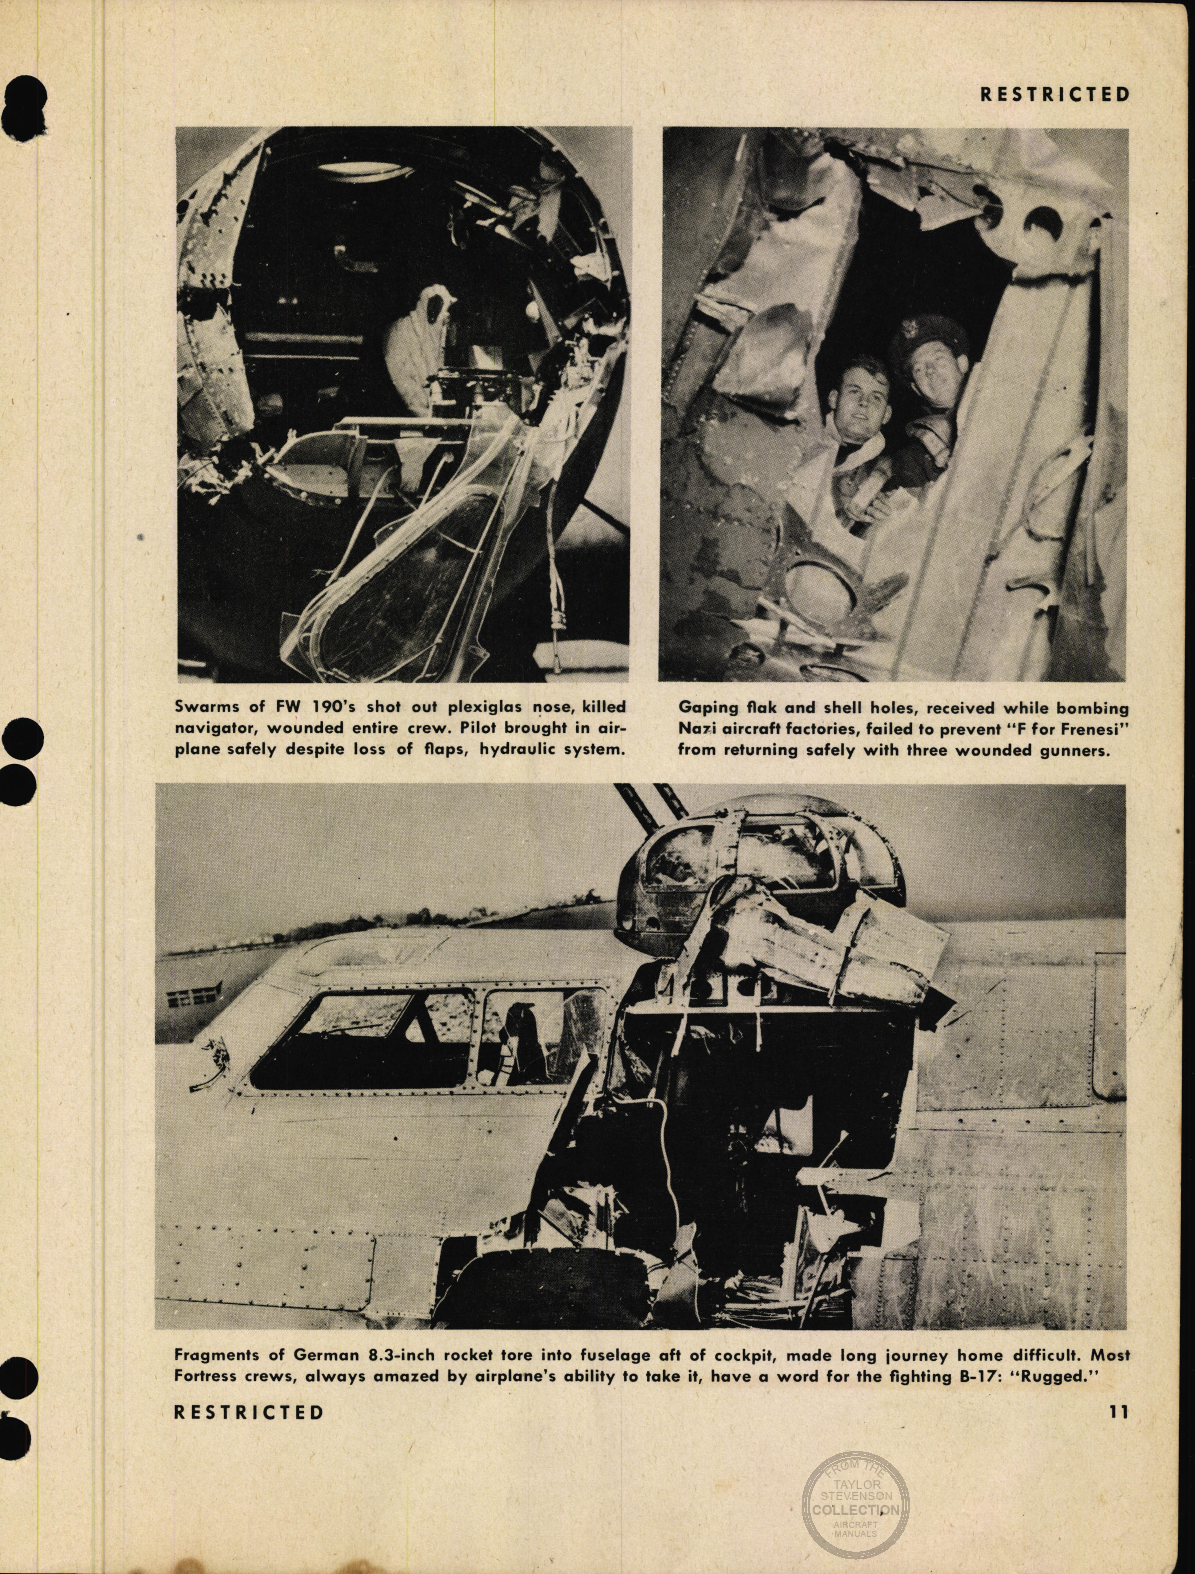 Sample page 7 from AirCorps Library document: The Story of the B-17 (Flight Instructions)